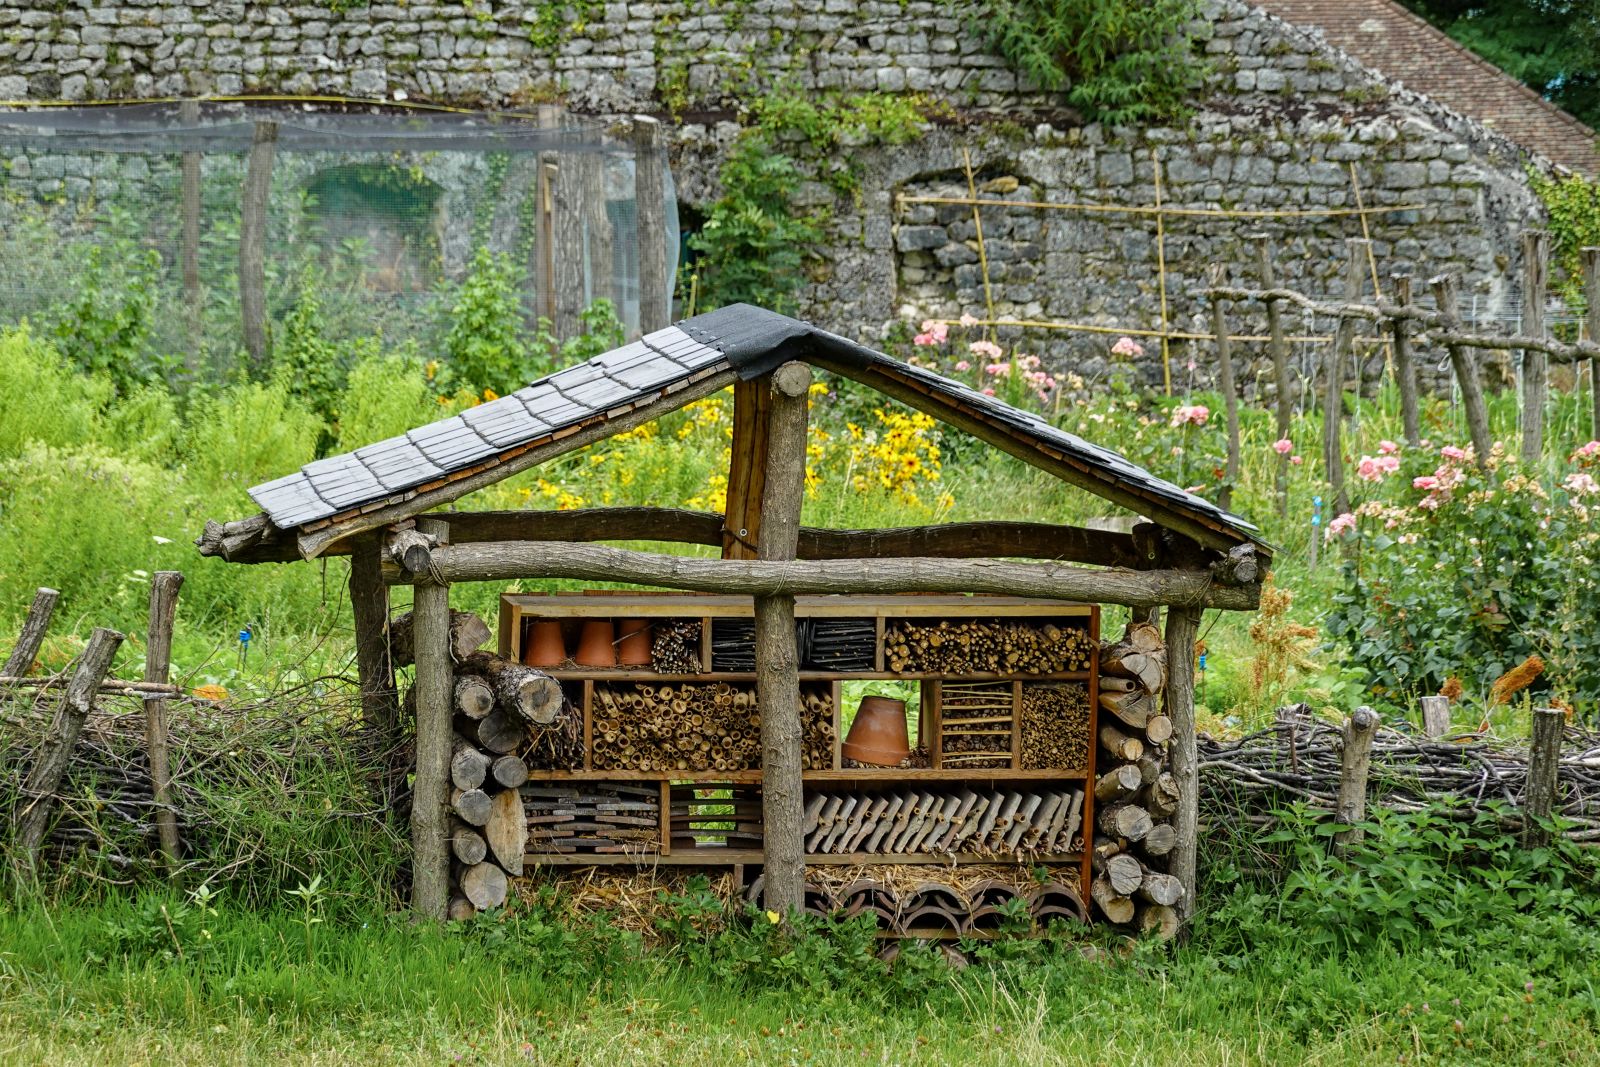 A shed with tools in a garden